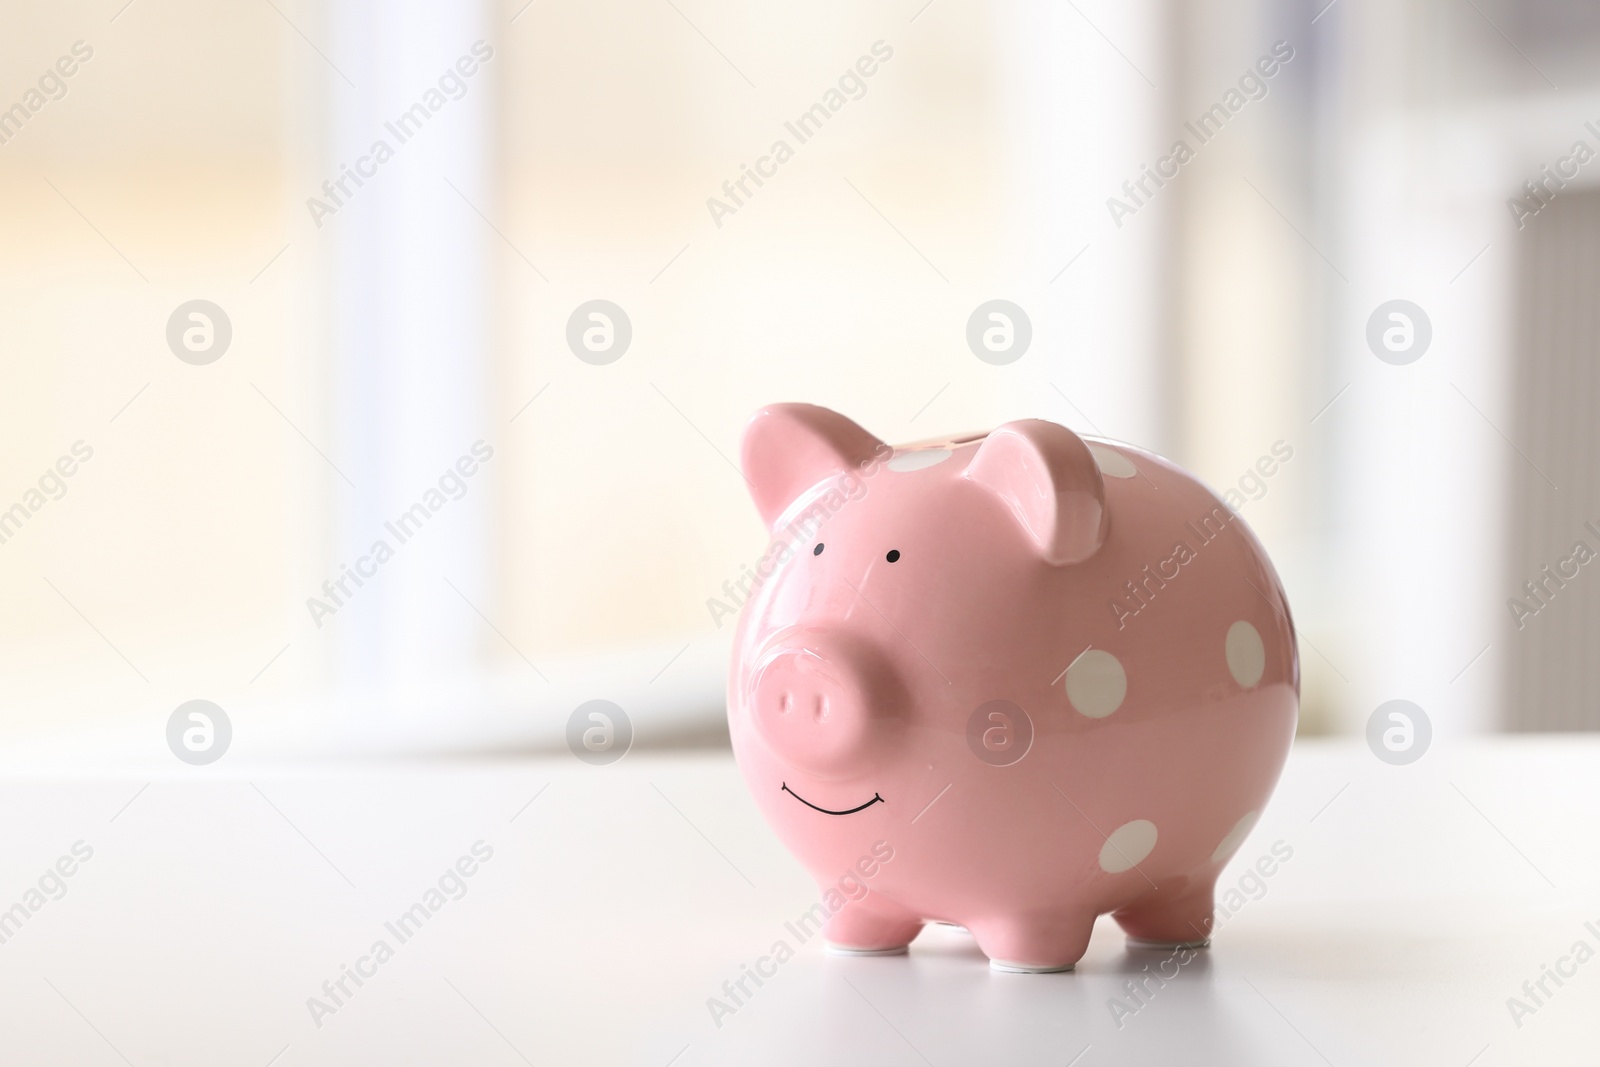 Photo of Piggy bank on table against blurred background. Space for text